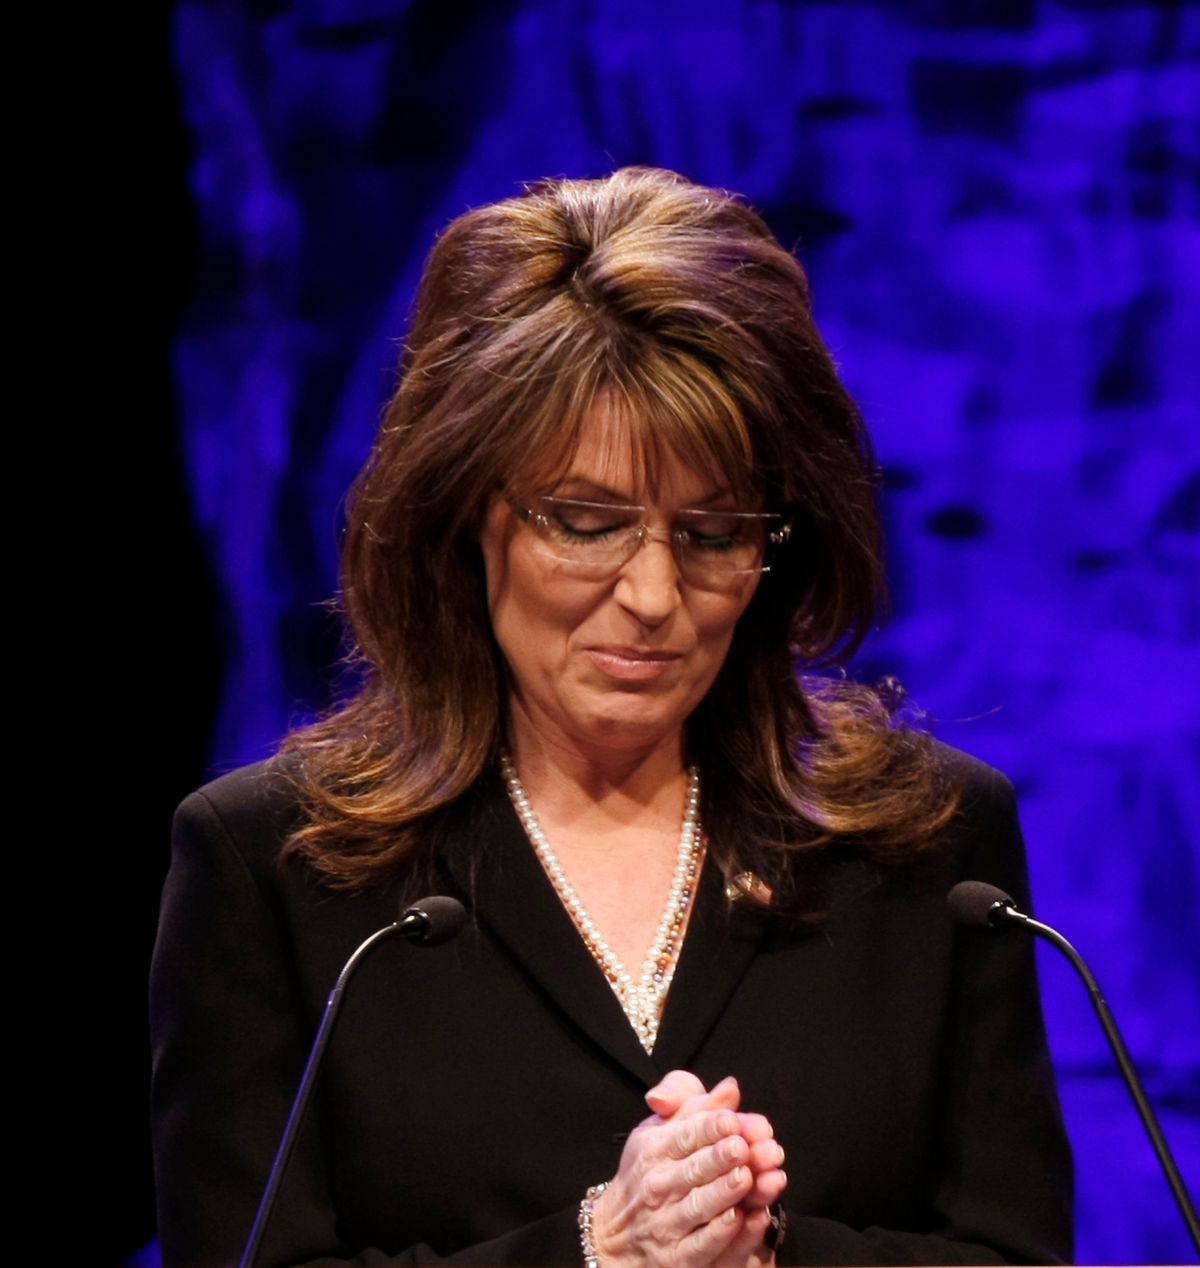 Former vice presidential candidate Sarah Palin addresses attendees at the National Tea Party Convention in Nashville, Saturday, Feb. 6, 2010.  (AP Photo/Ed Reinke) (Ed Reinke)